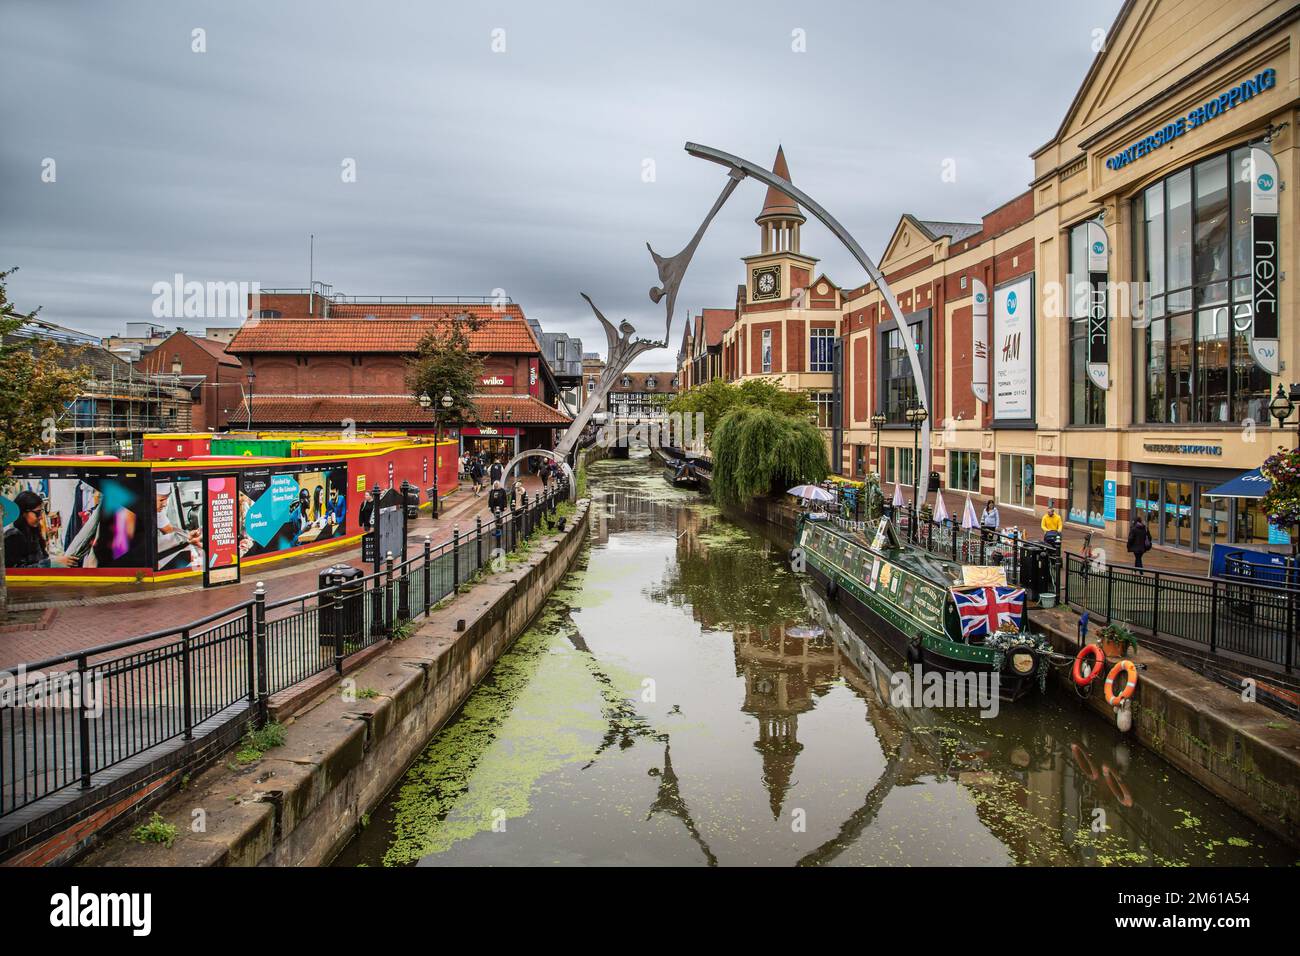 The Waterside shopping Centre, alongside the River Witham in Lincoln City Centre. The River is spanned by a striking sculpture entitled Empowerment. Stock Photo